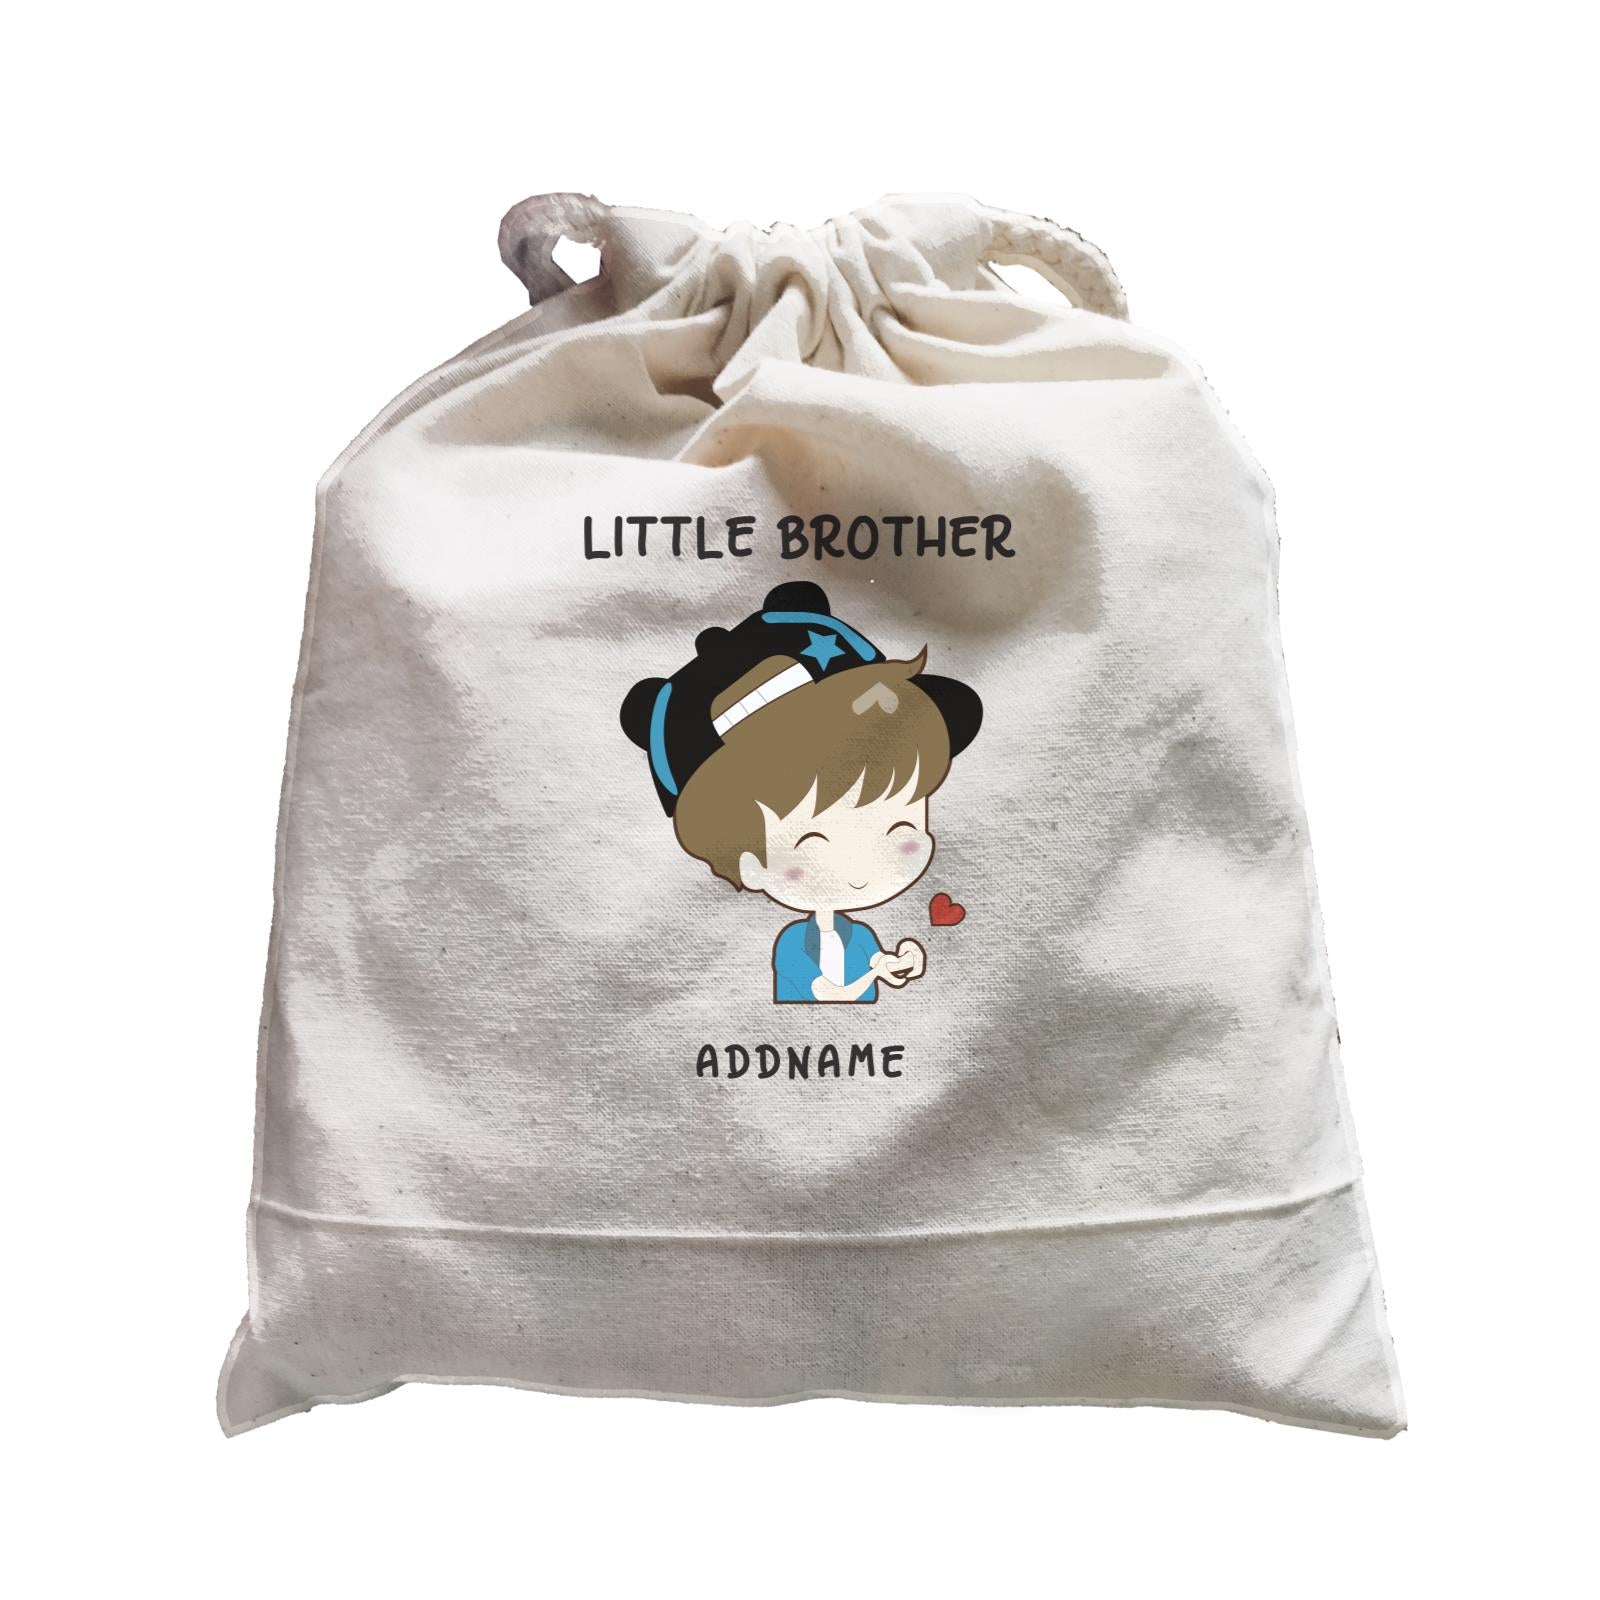 My Lovely Family Series Little Brother Addname Satchel